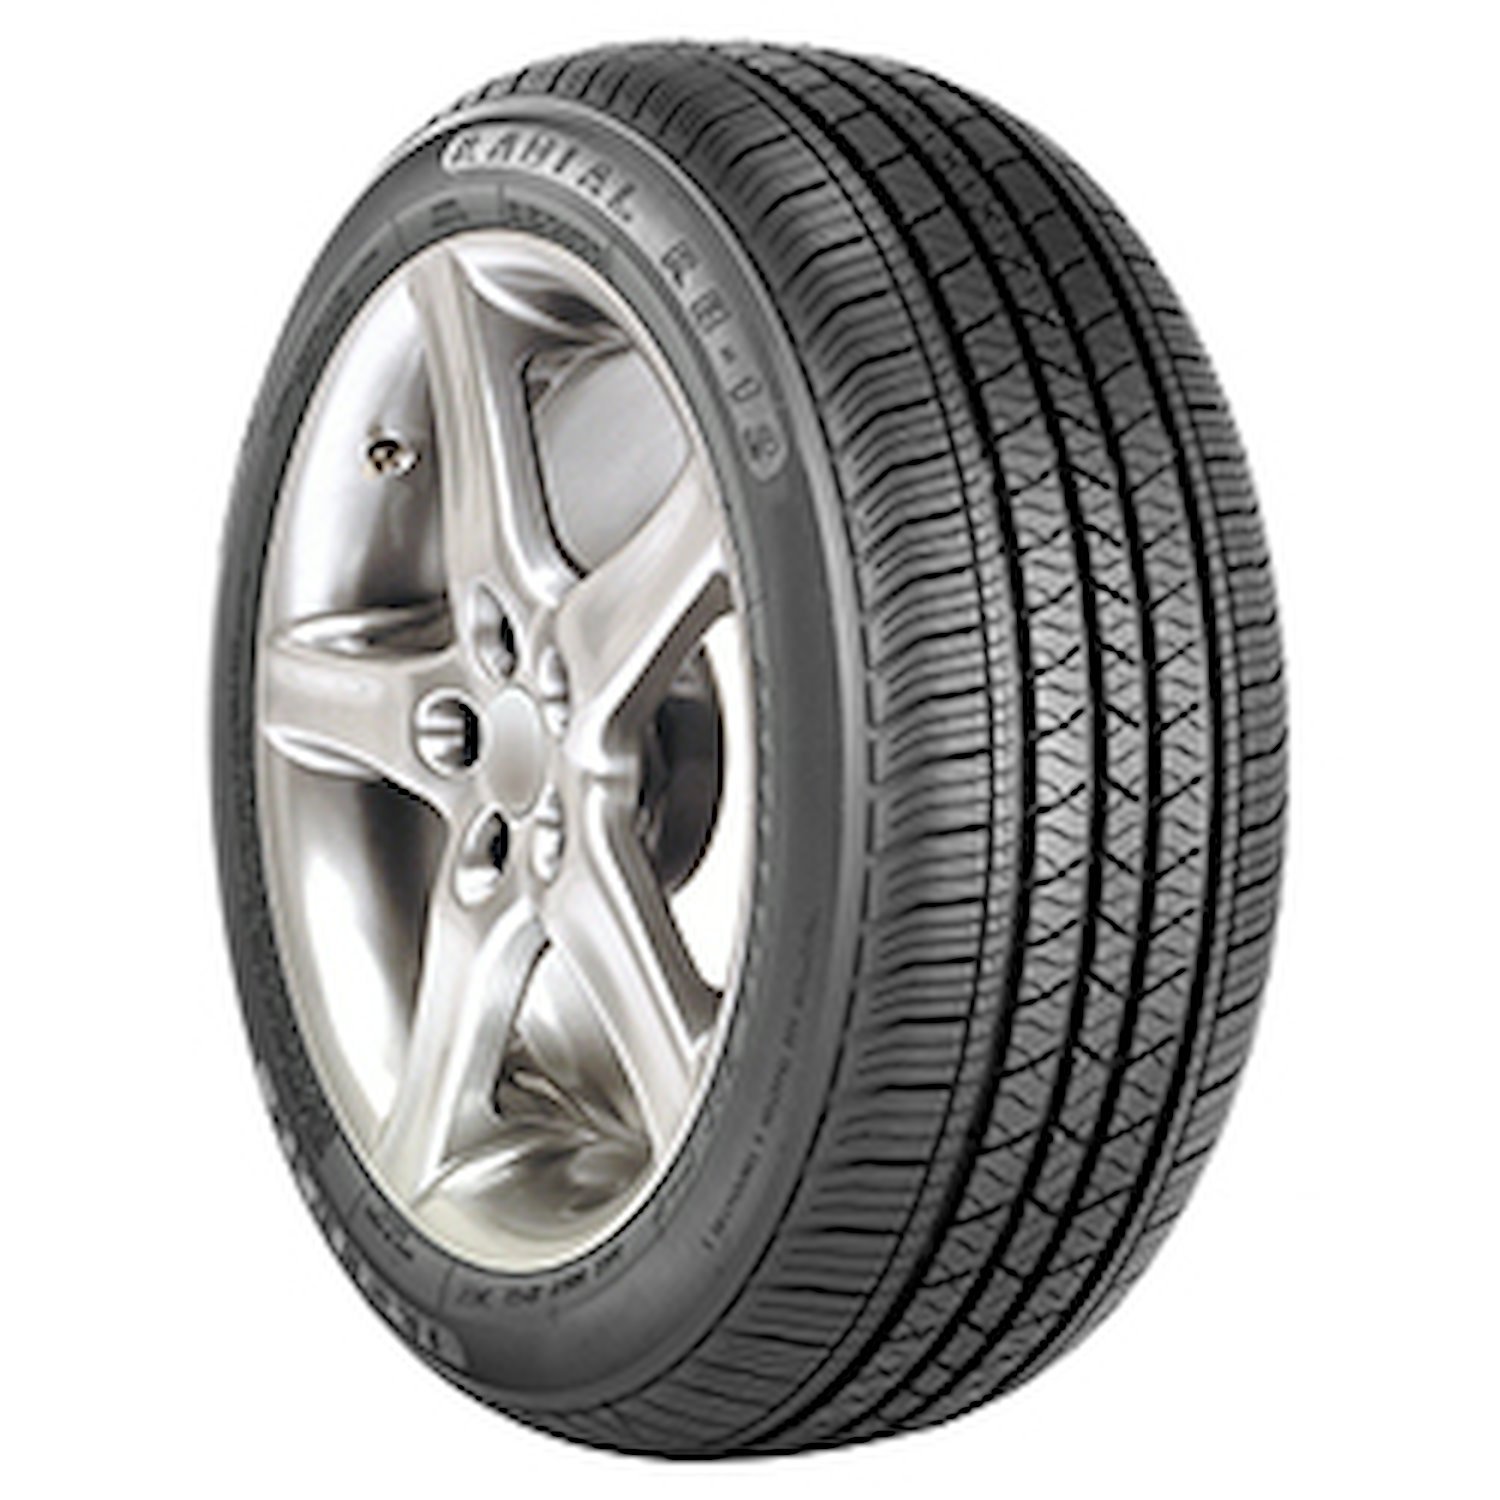 RB-12 Tire, 175/65R14 82T